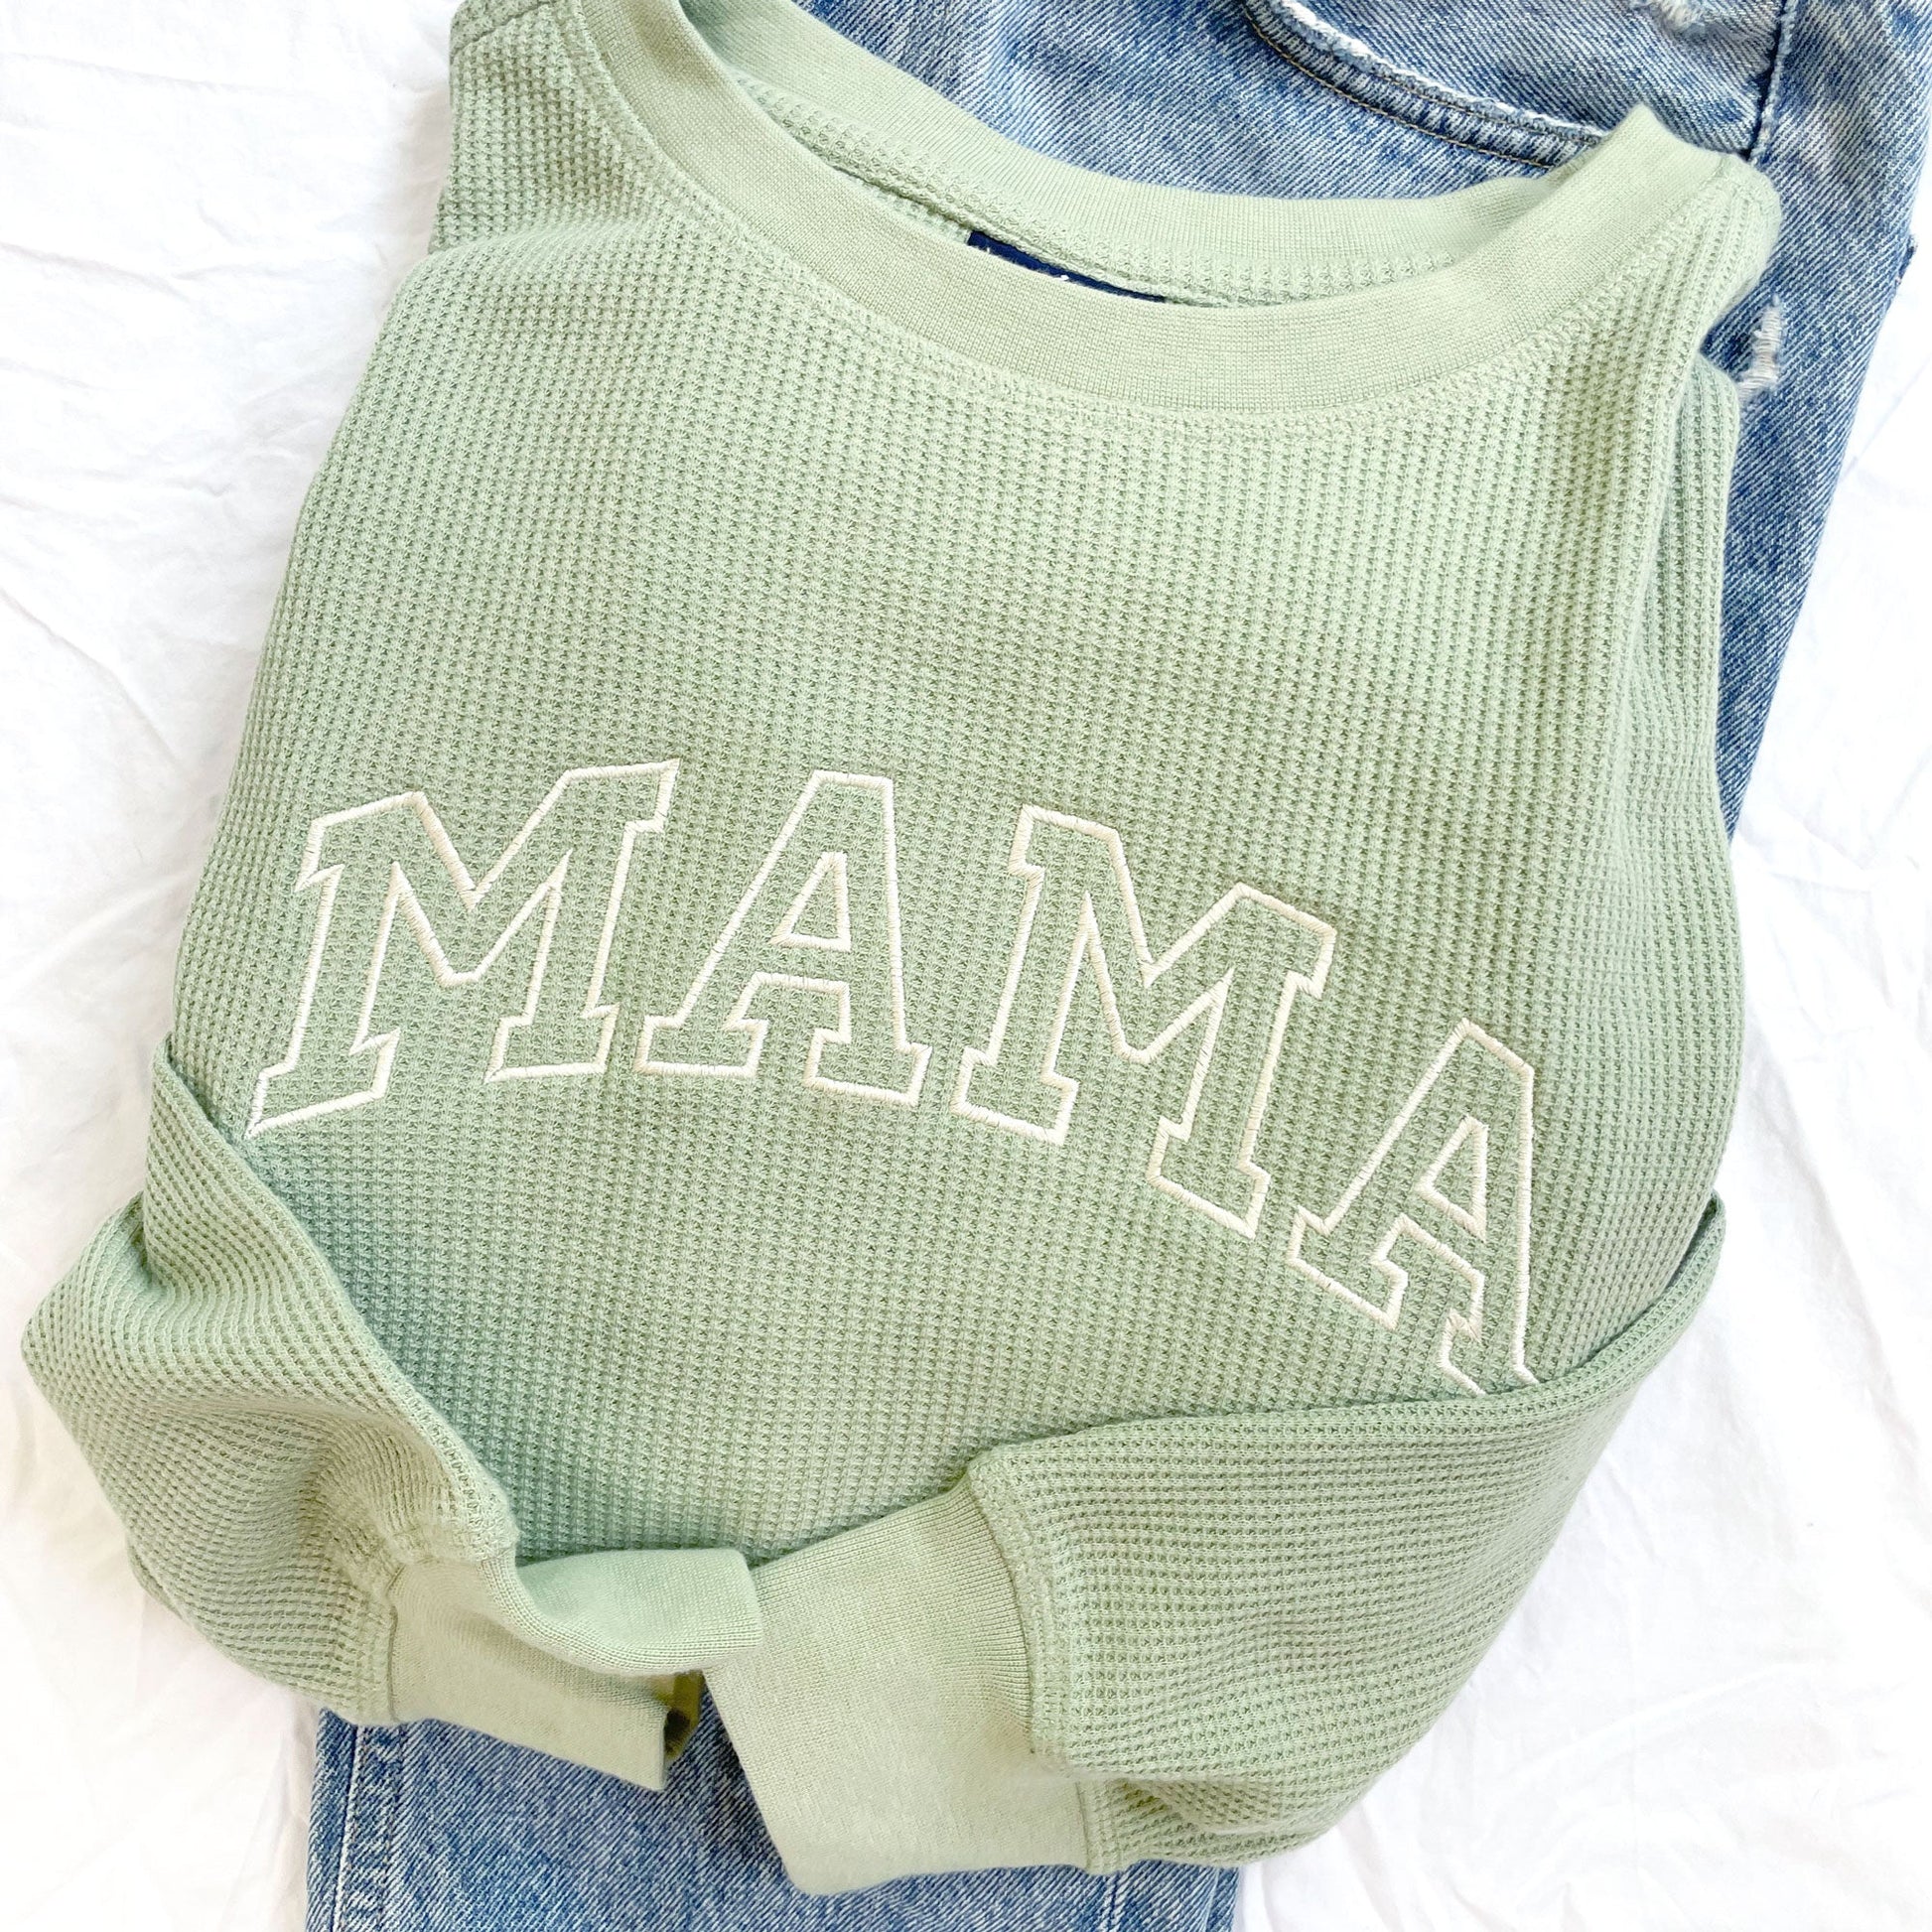 sage green crewneck with mama in embroidered outlined varsity letters across the chest folded on top of a pair of jeans